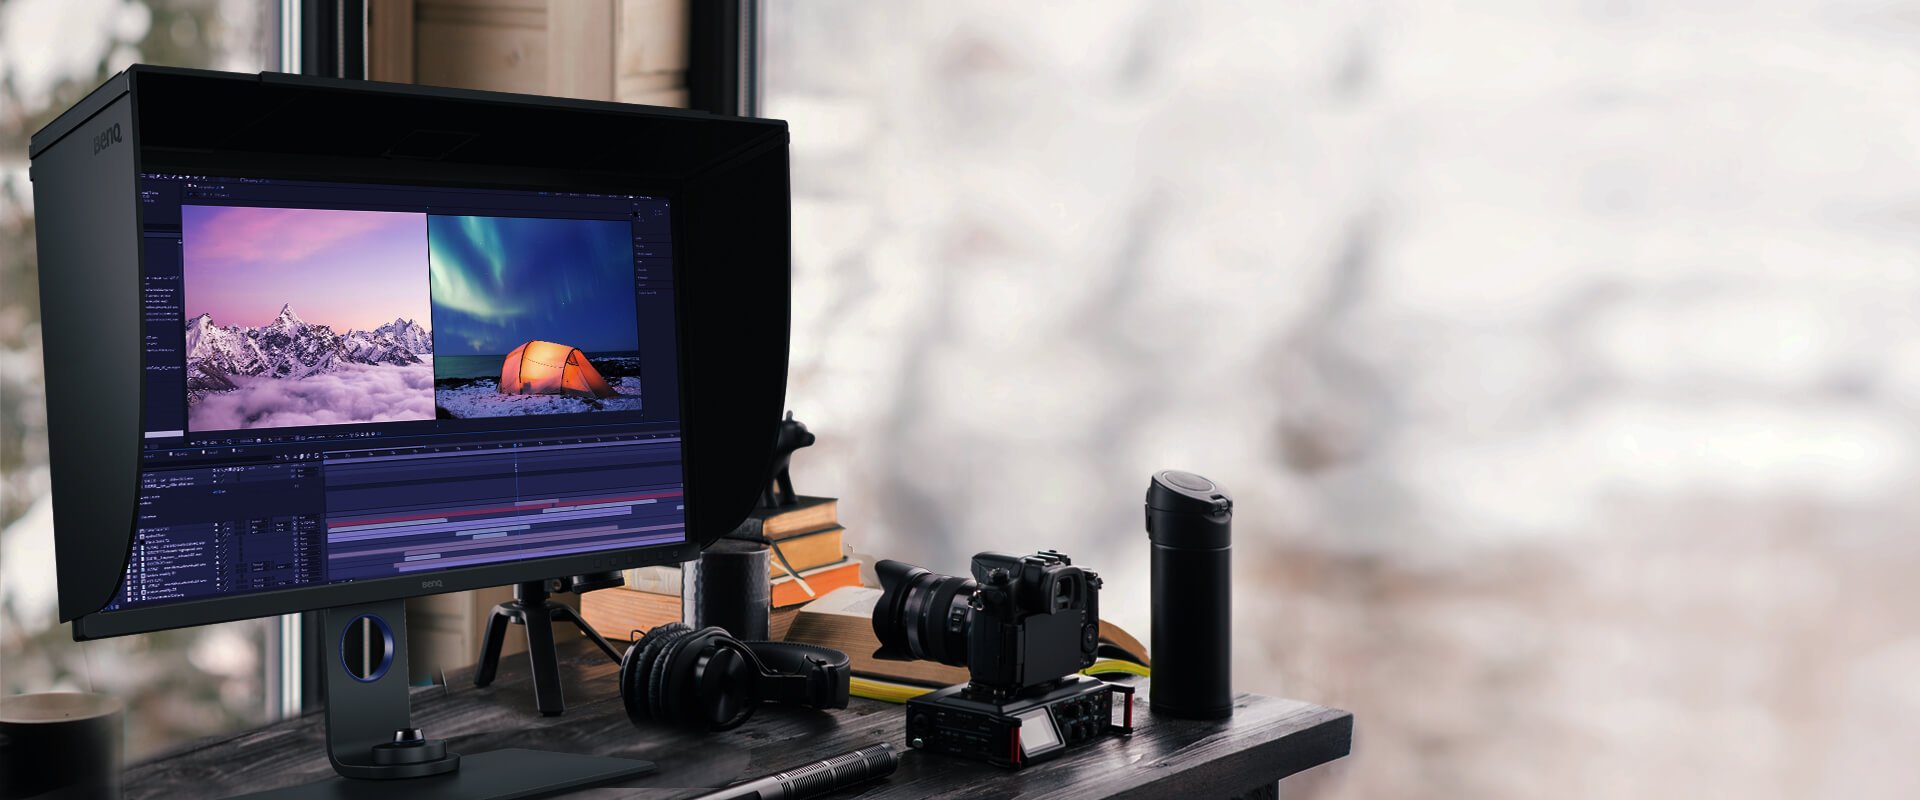 sw271c helps pros get the best results with hdr support and multiple video formats